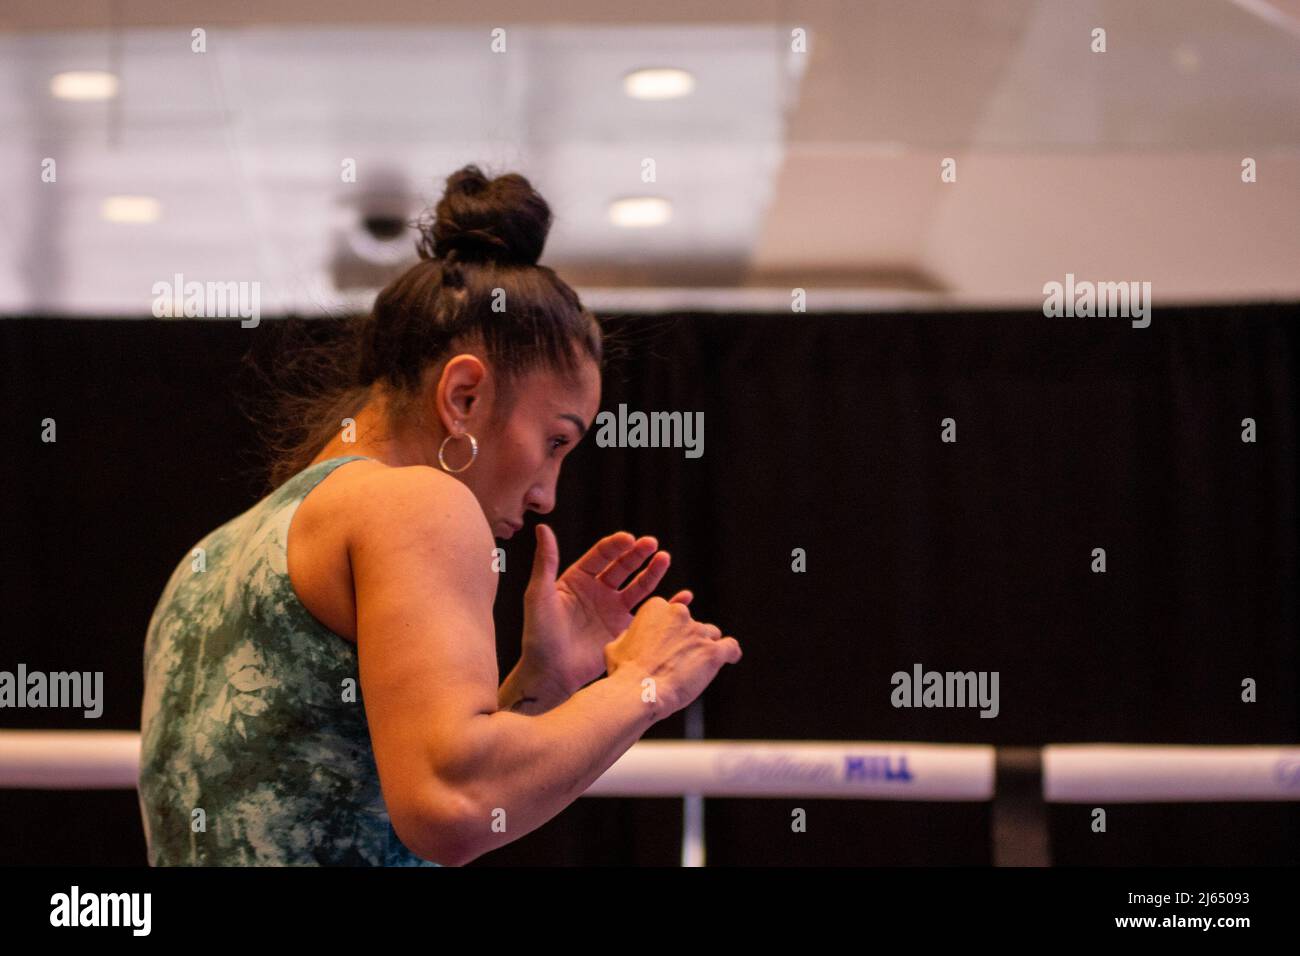 NEW YORK, NY - APRIL 27: Amanda Serrano during open workouts prior to her clash with Katie Taylor at Madison Square Garden on April 27, 2022 in New York, NY, United States. (Photo by Matt Davies/PxImages) Credit: Px Images/Alamy Live News Stock Photo